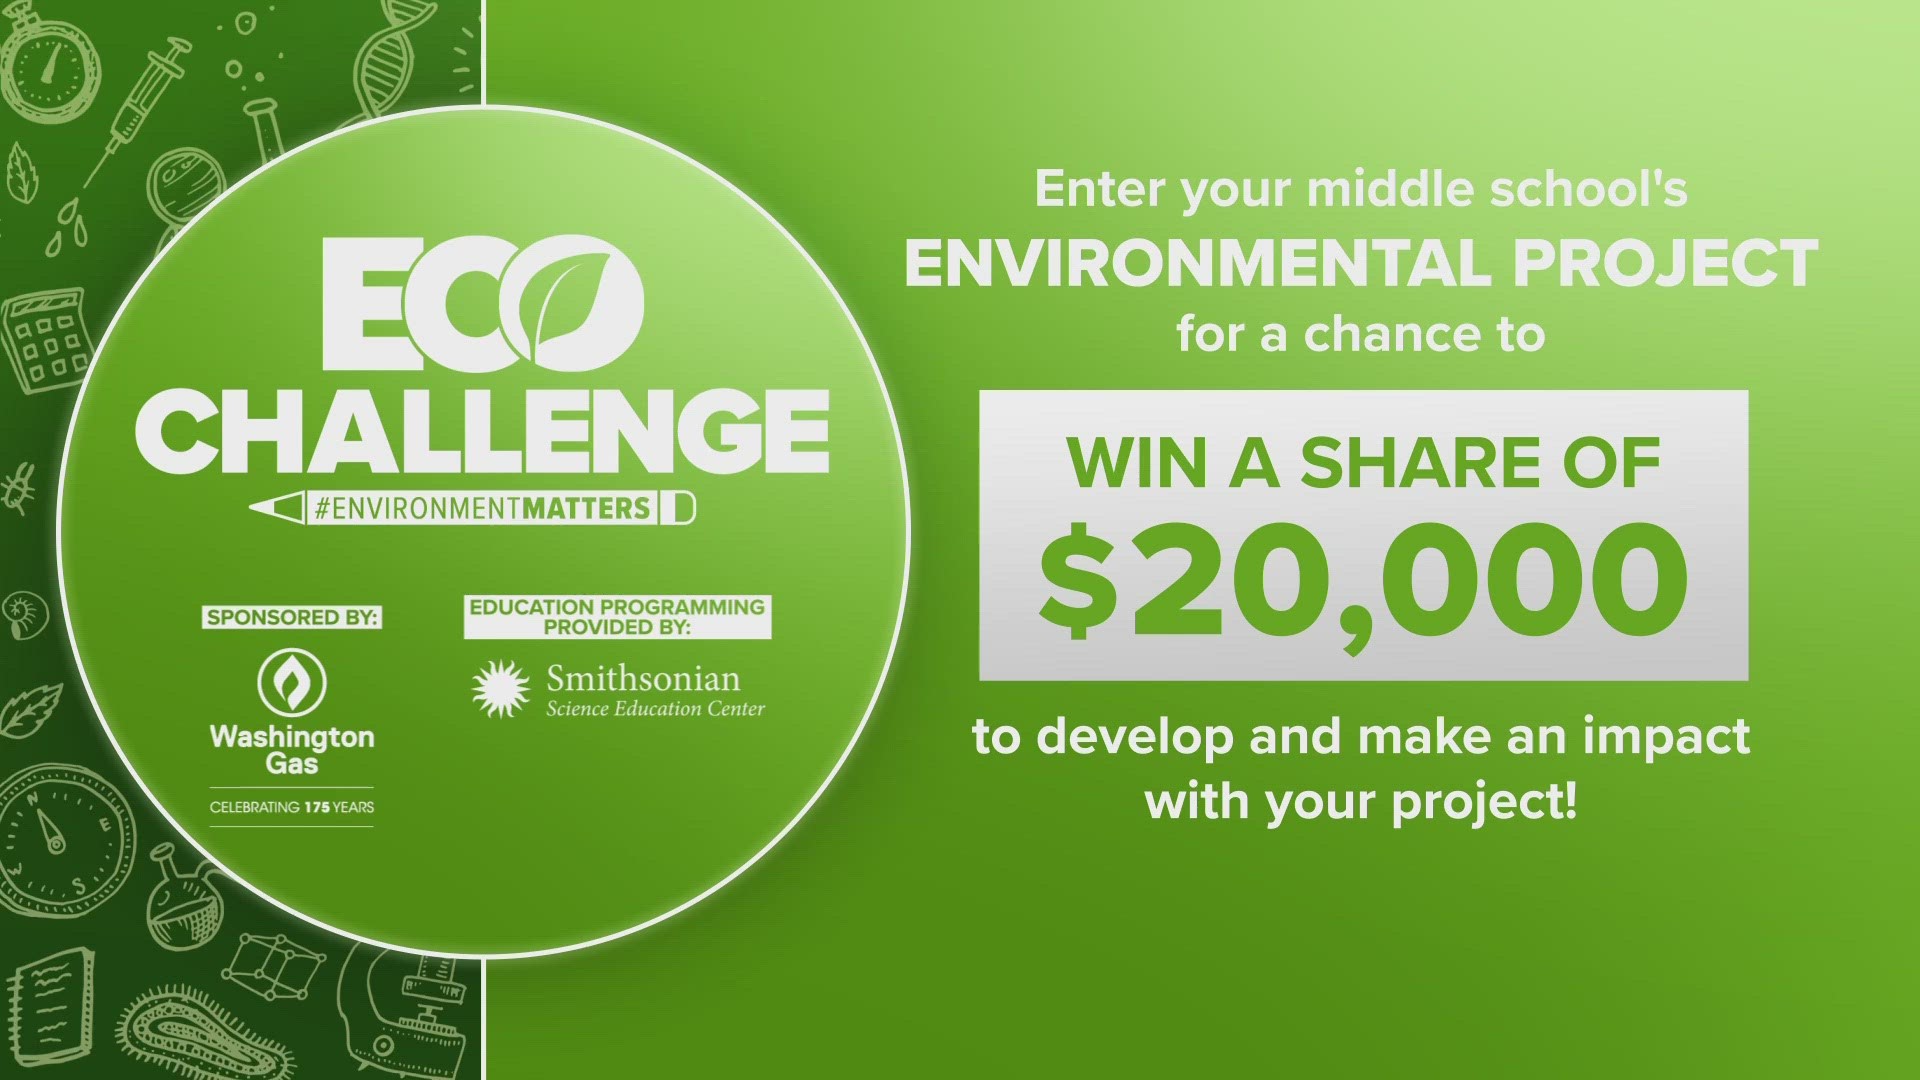 We're teaming up with Washington Gas, and the Smithsonian Science Education Center to bring you the Eco challenge.